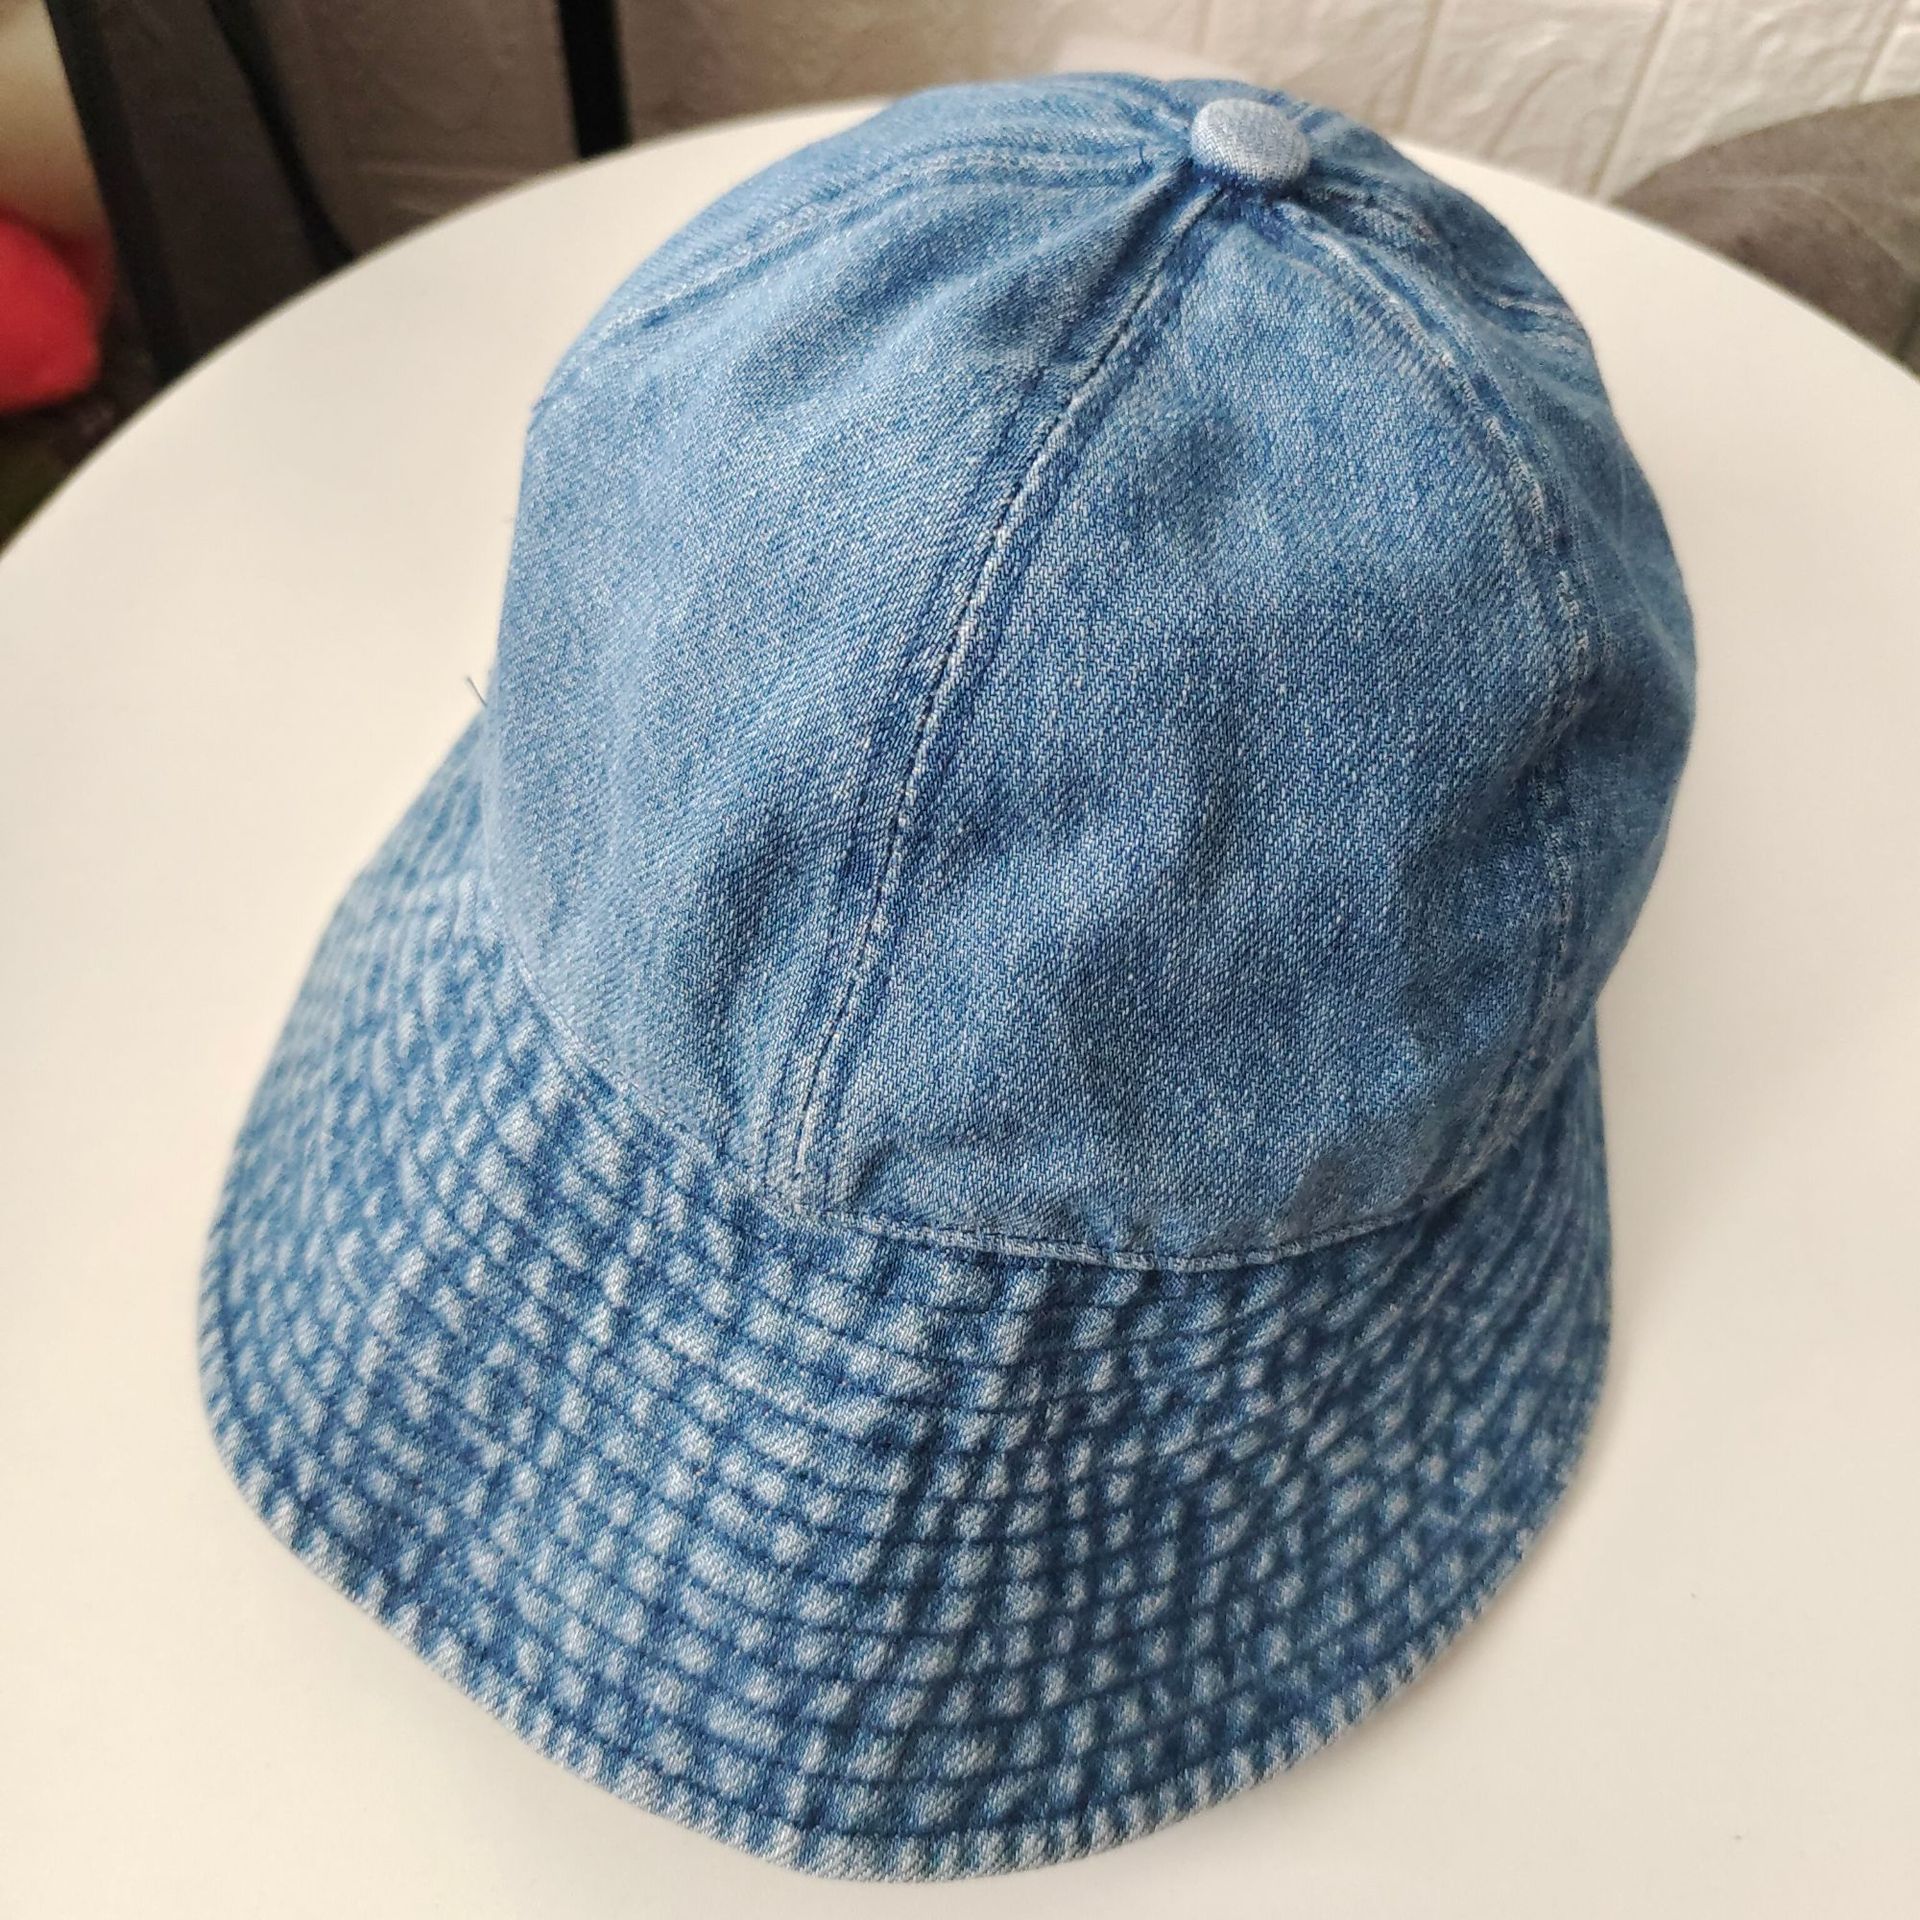 Zhao Lusi Same Denim Peaked Cap Bucket Hat Women's Spring and Summer All-Matching Plain Sun Protection Big Head Circumference Sun Hat Tide